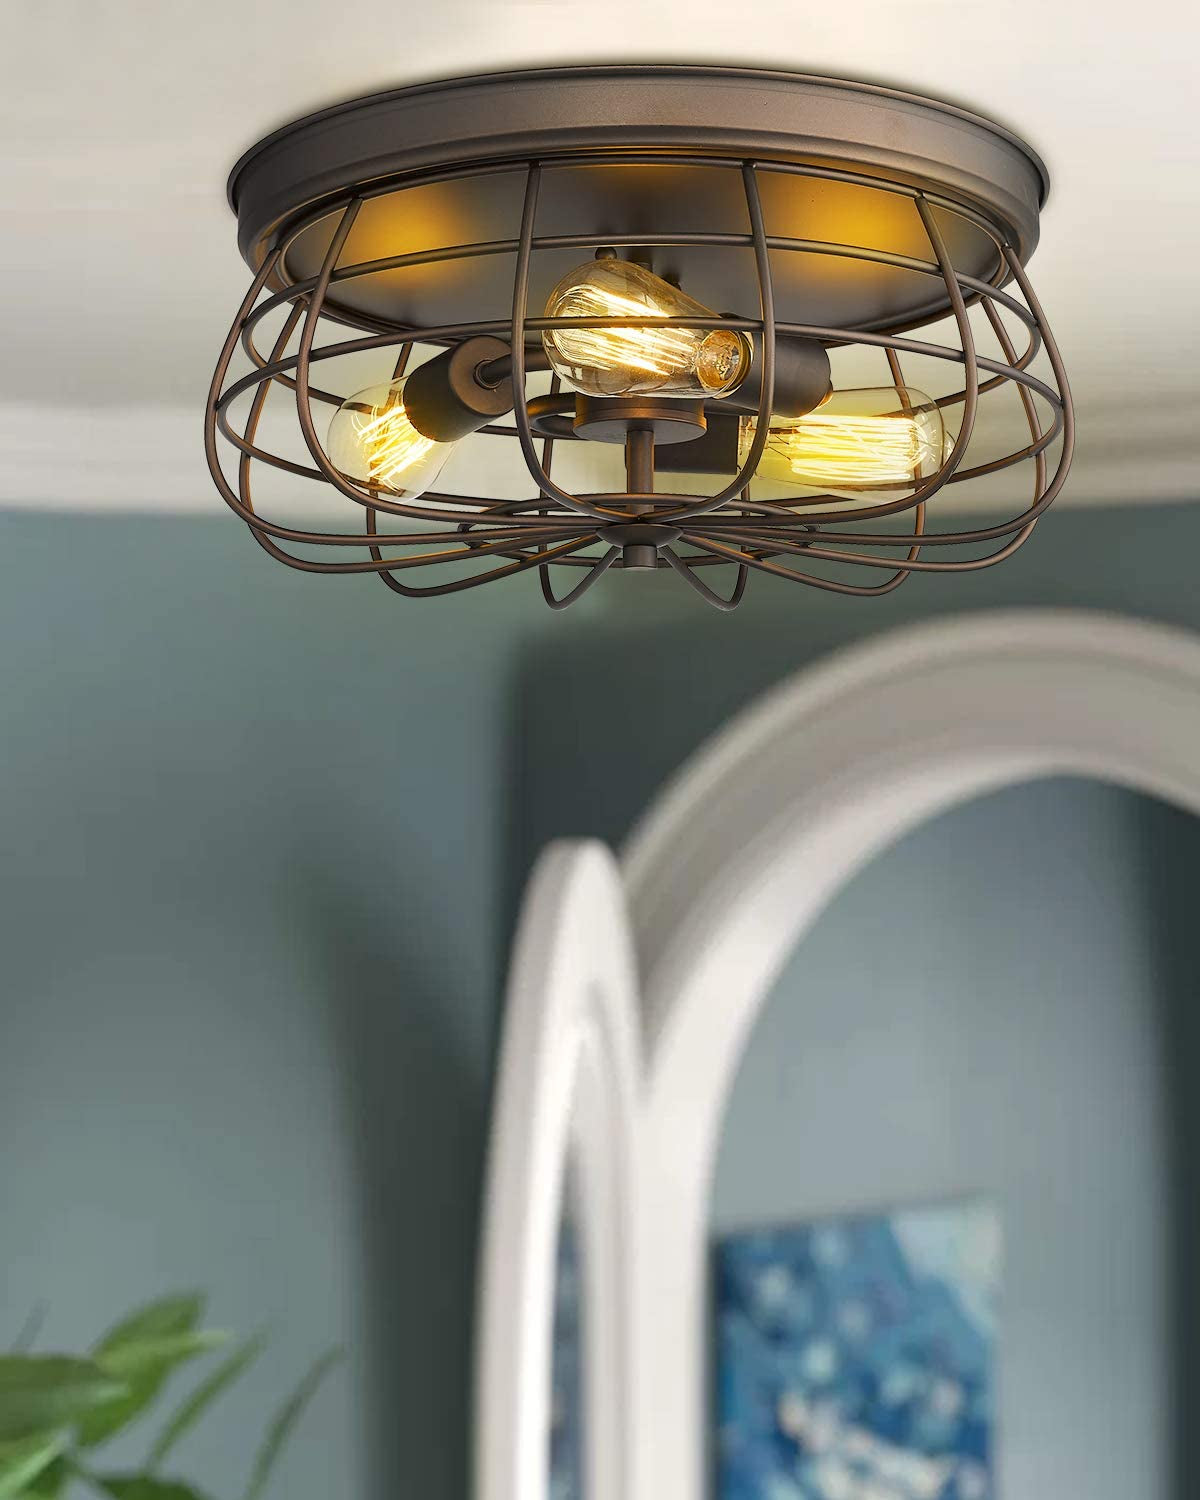 3-Light Flush Mount Ceiling Light, 15 Inch Ceiling Light Fixture, Oil Rubbed Bronze and Metal Cage Shade, ZY16-F ORB